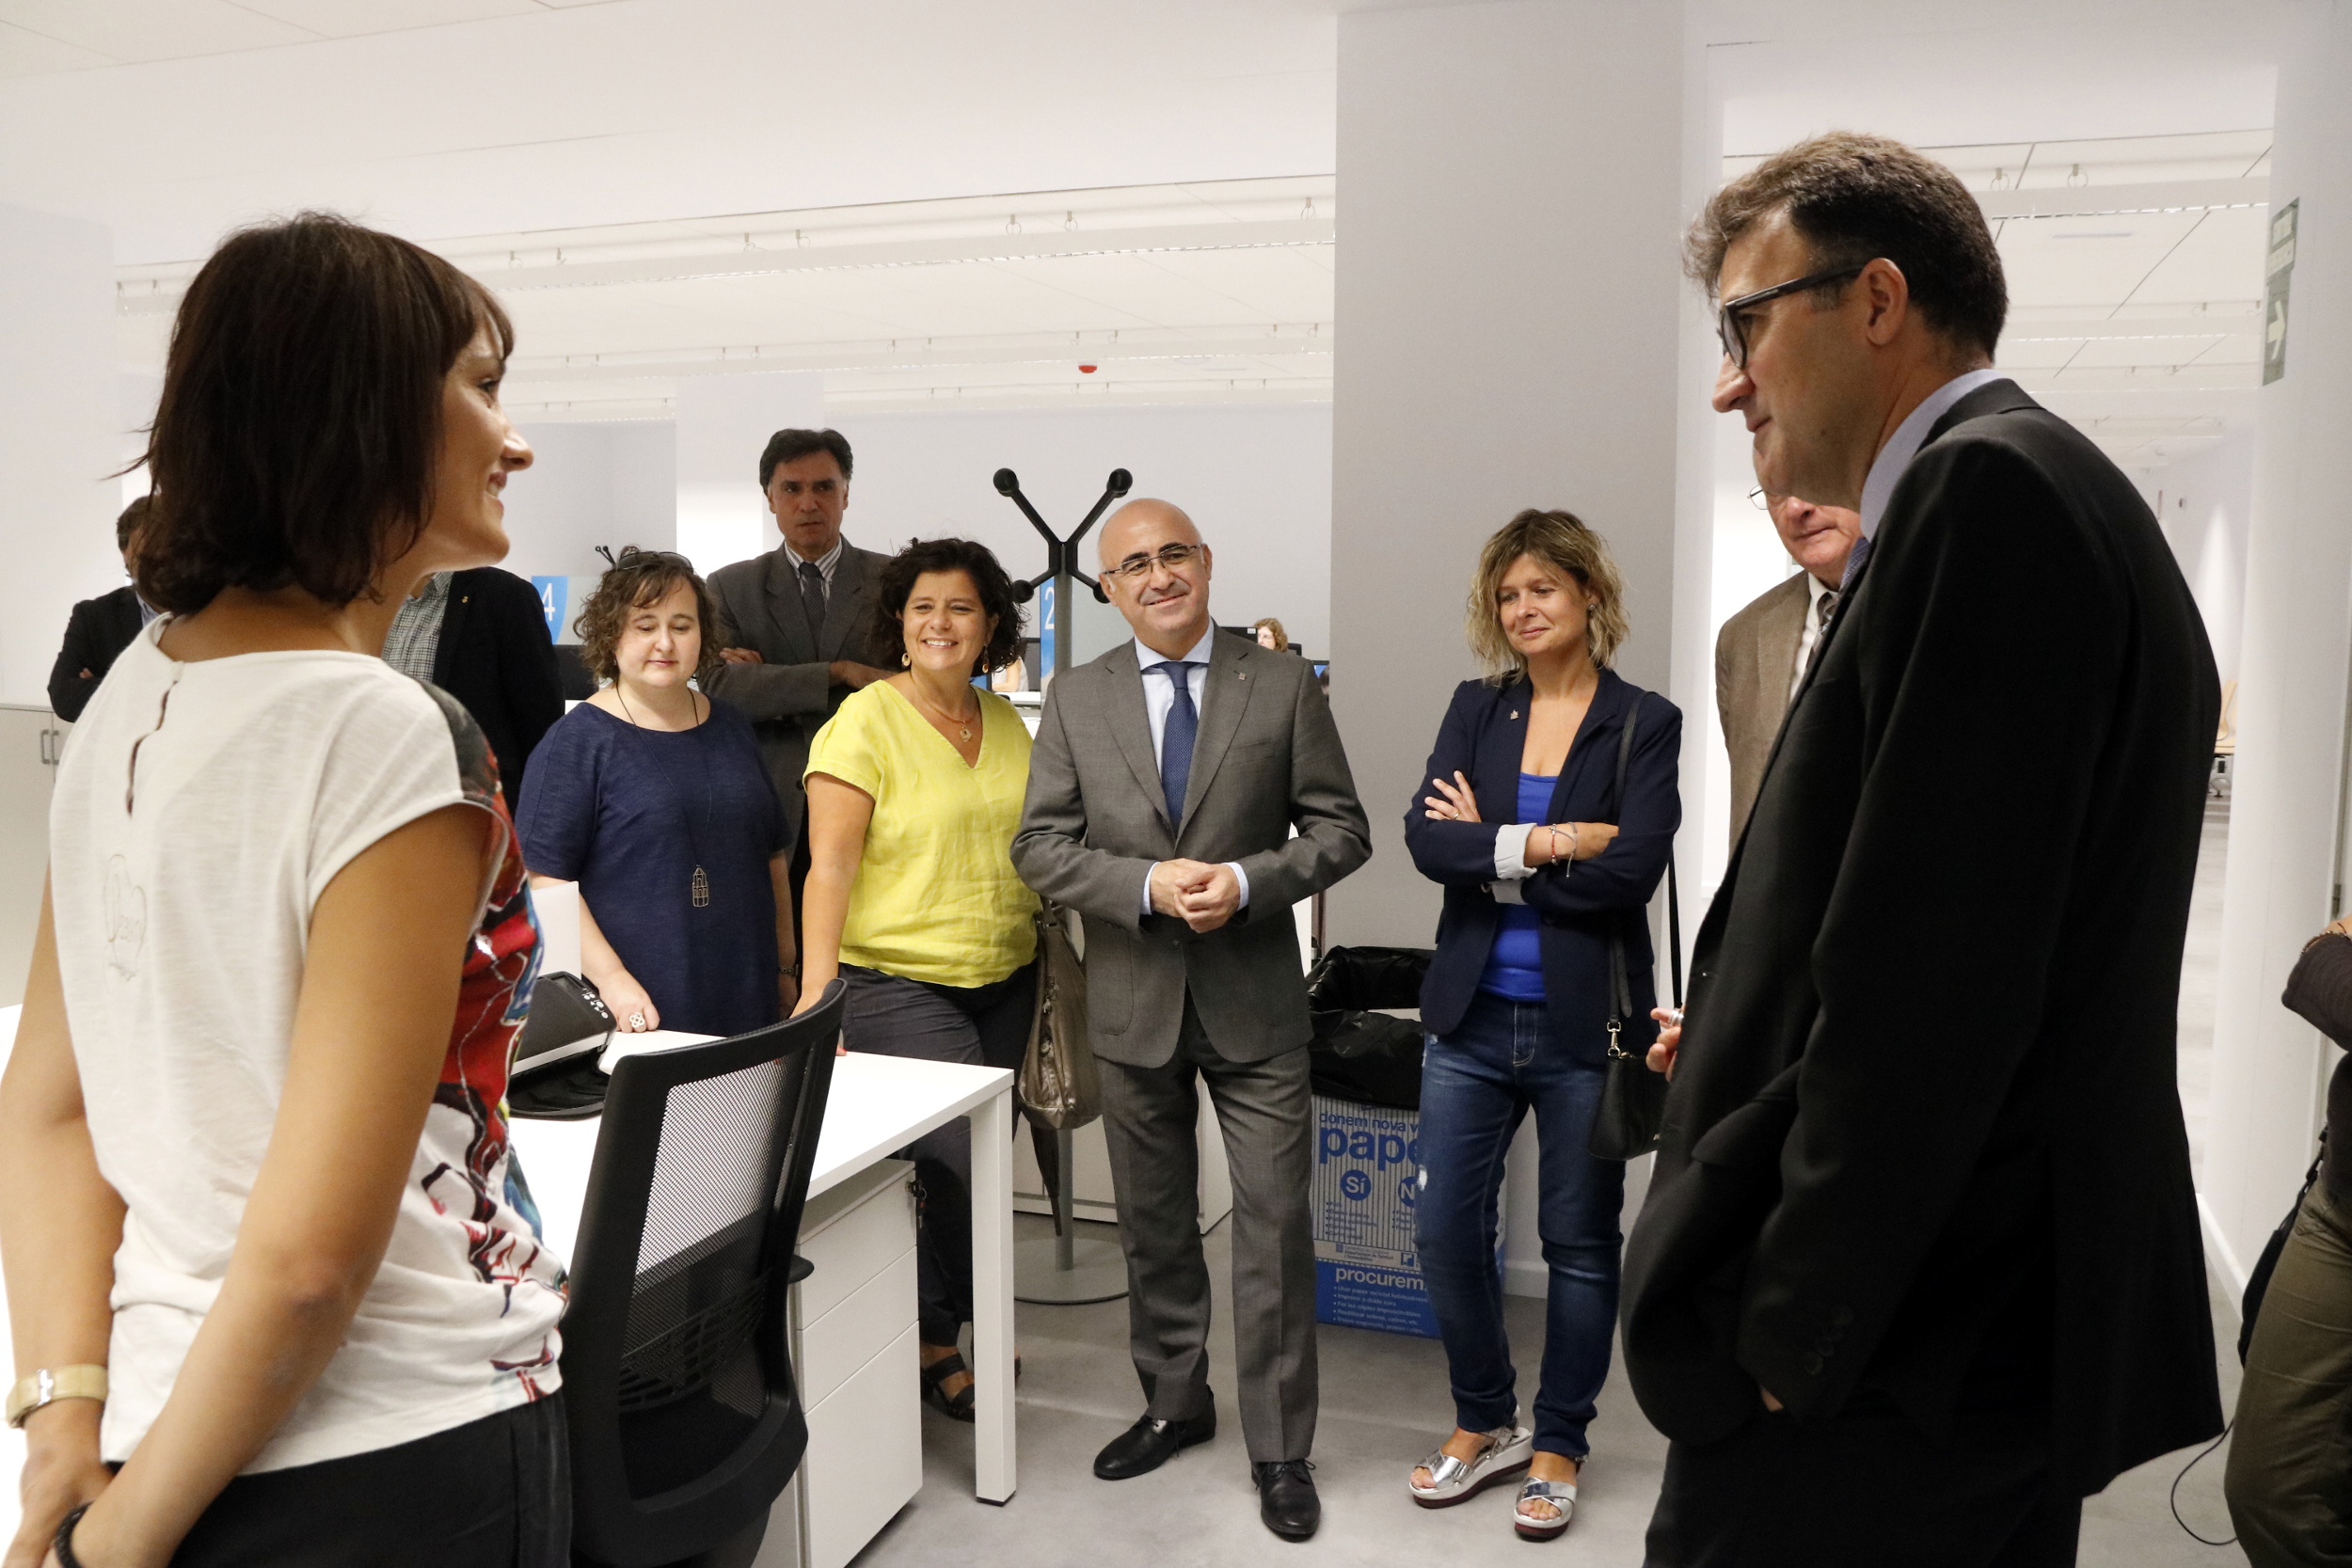 Catalan tax secretary, Lluís Salvadó, at the inauguration of ATC new offices in Reus (by ACN)